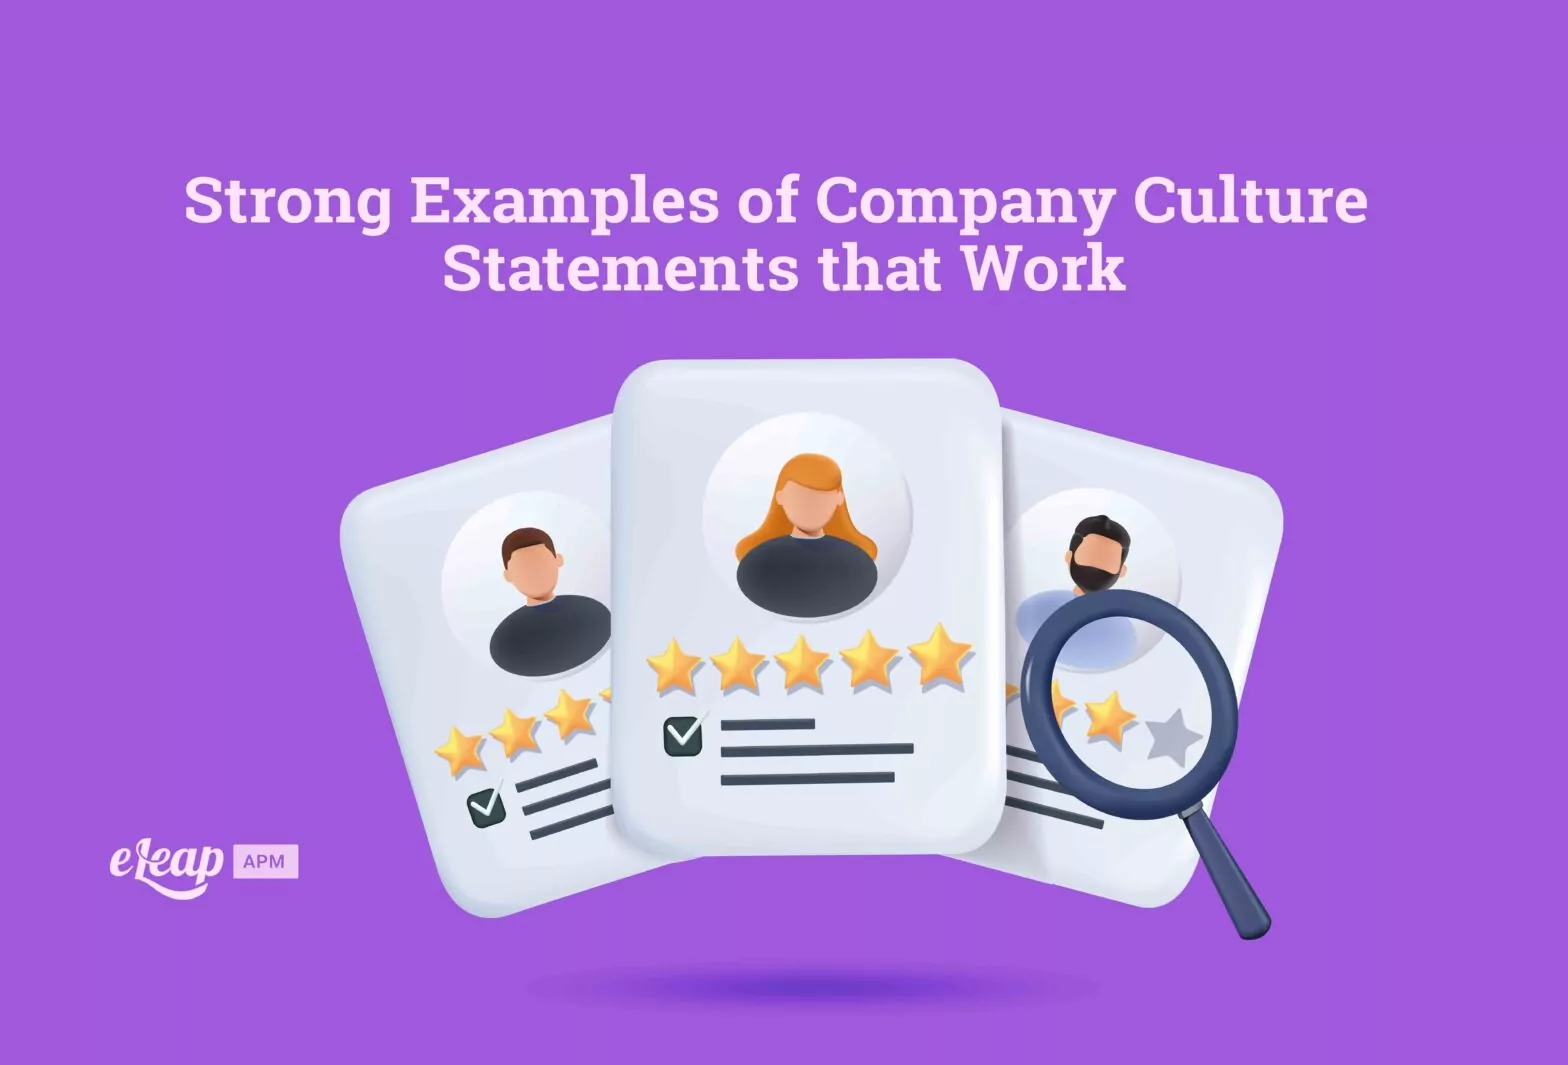 Strong Examples of Company Culture Statements that Work